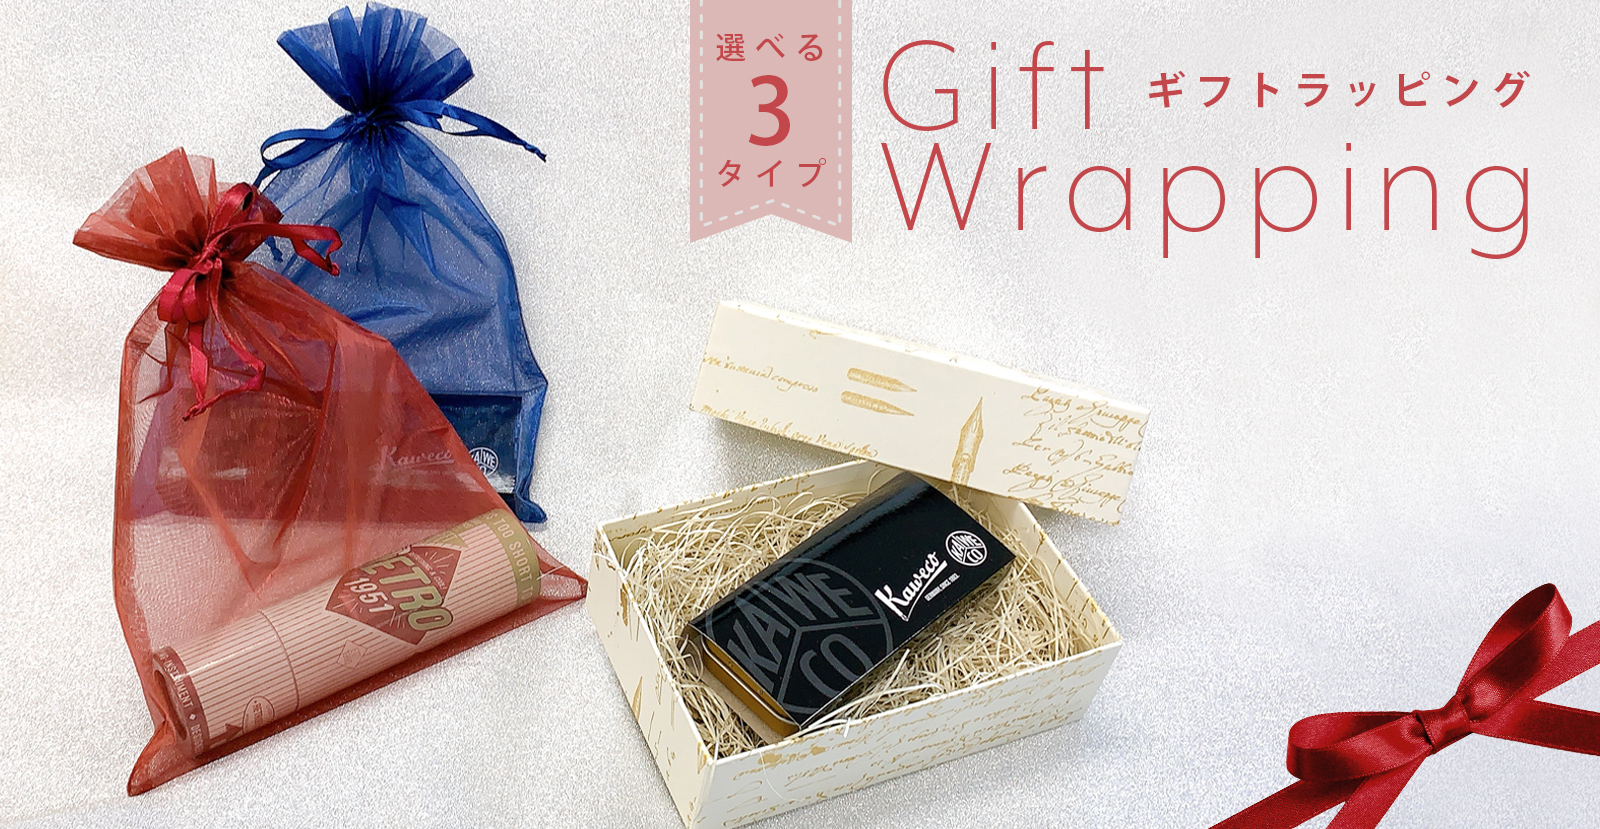 giftwrapping_TOPbanner.jpg